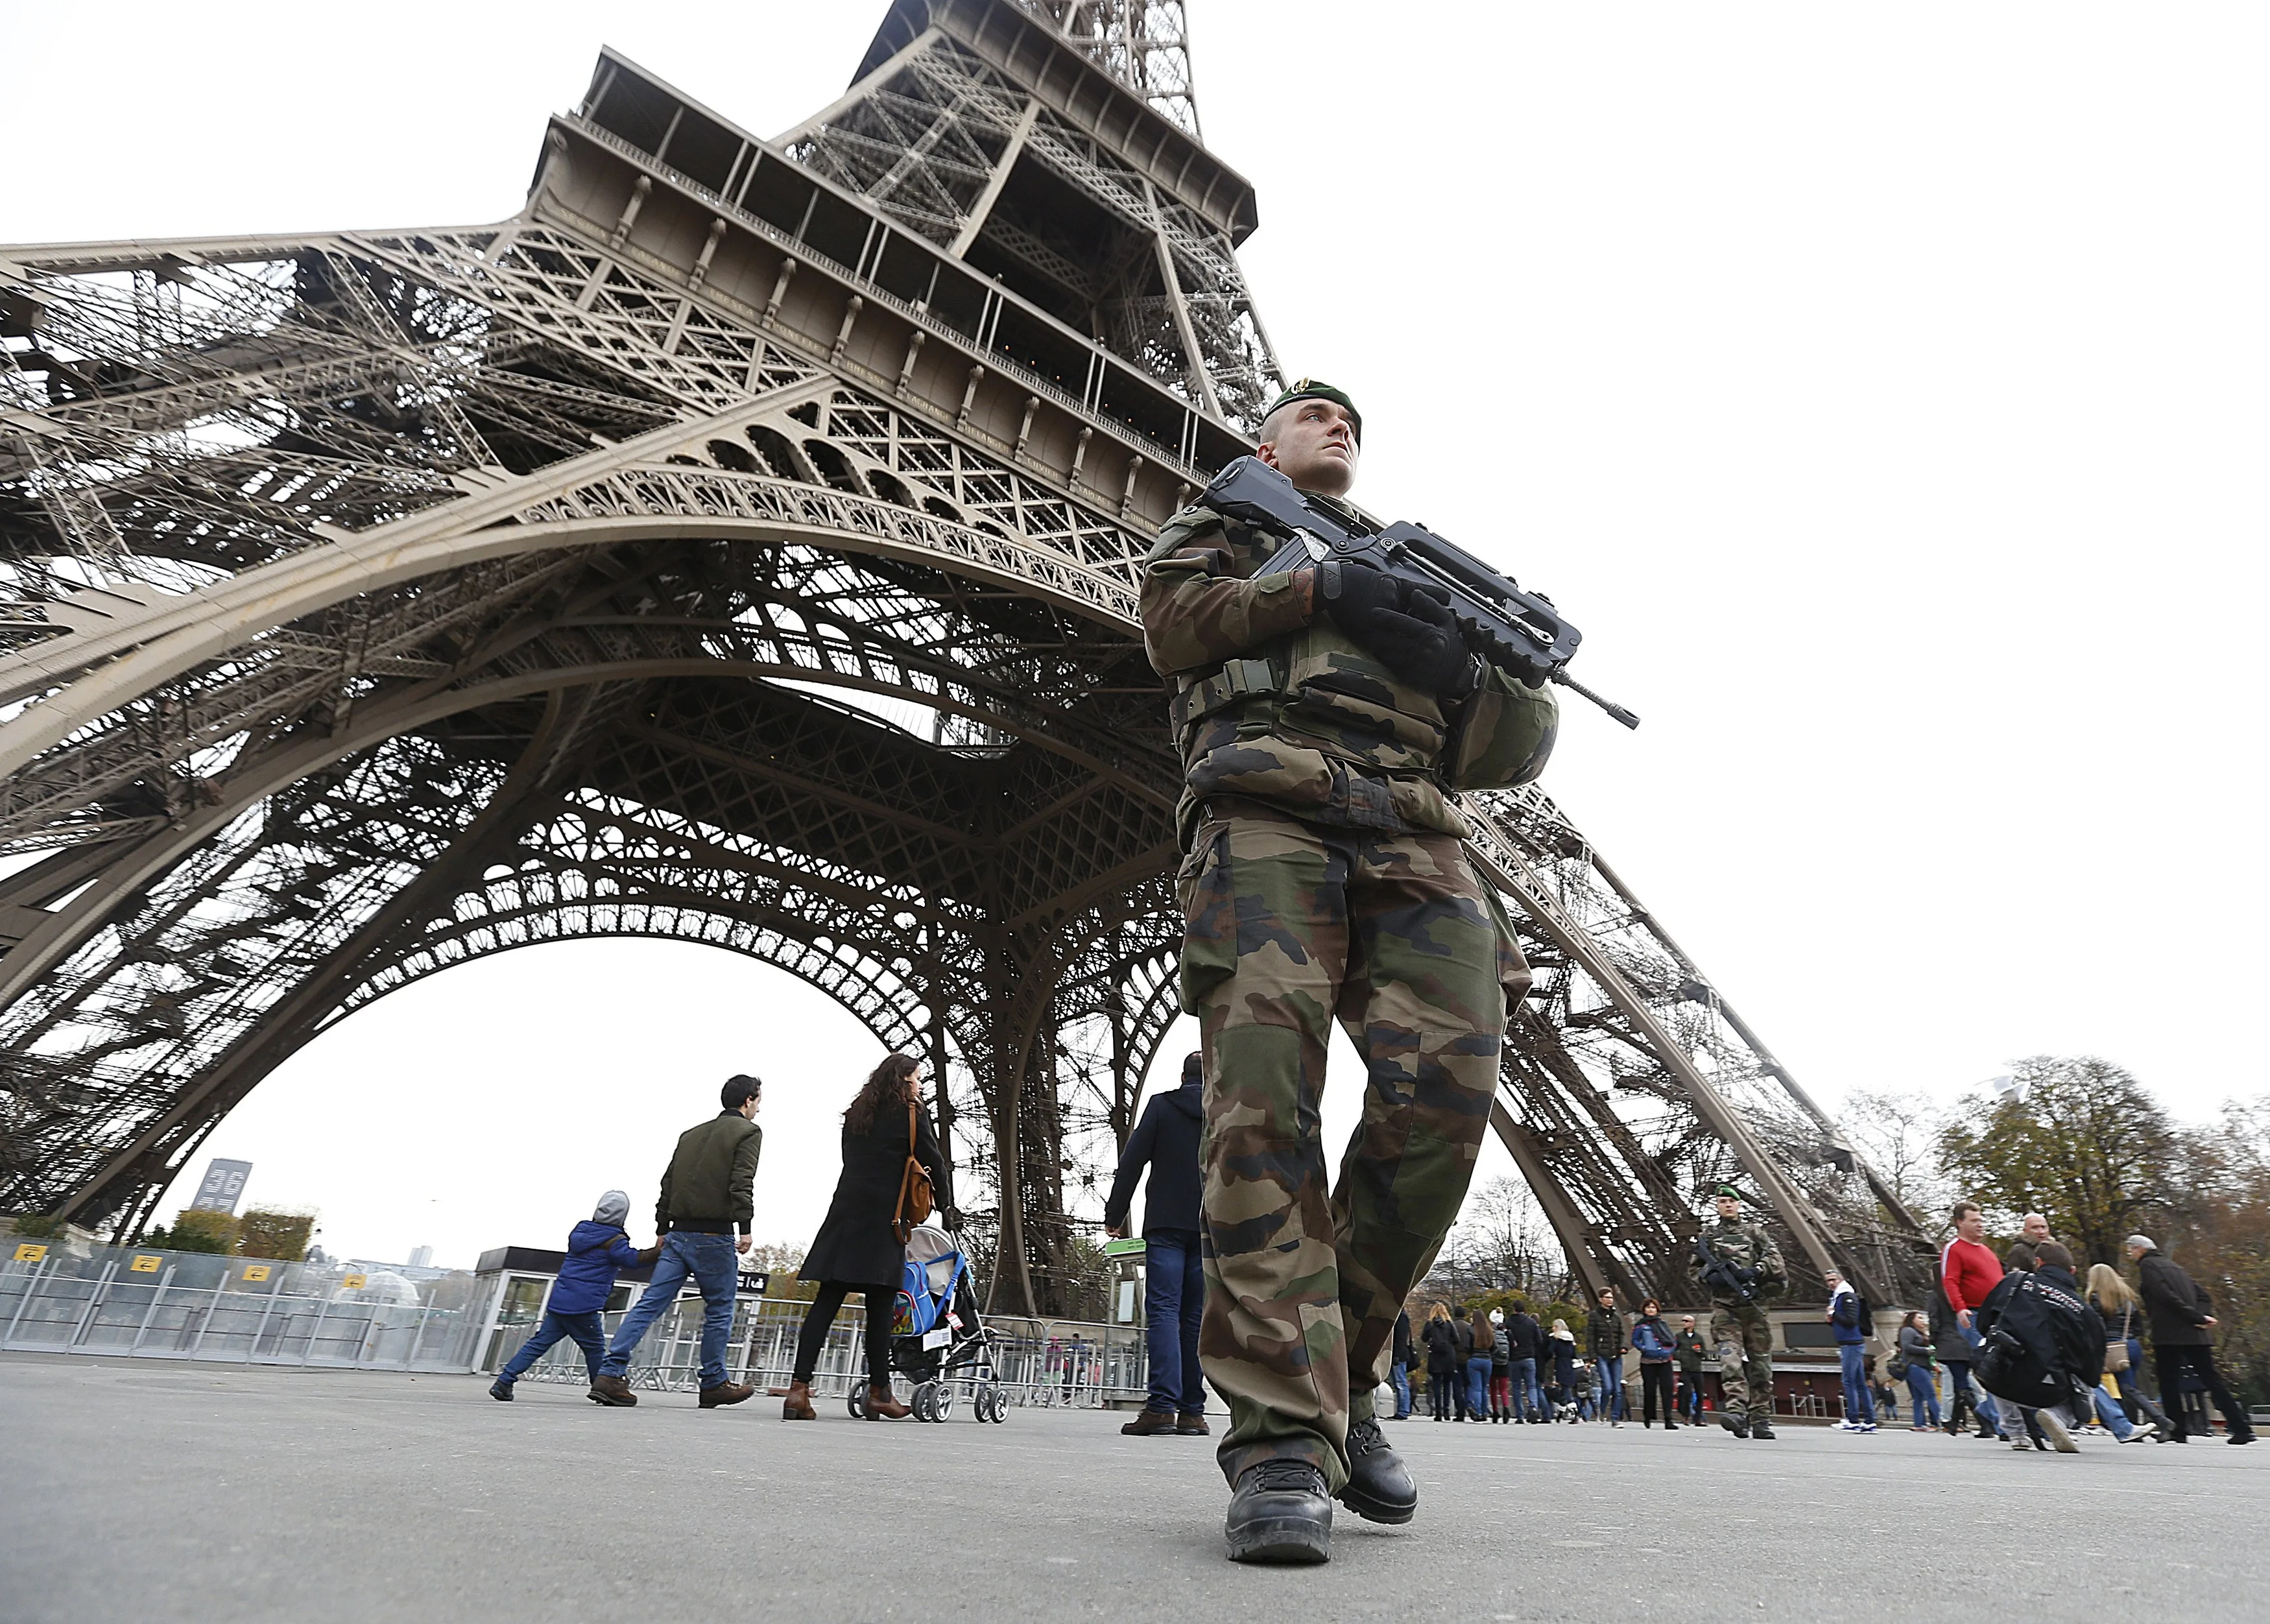 paris-attacks-police-officer-reuters-rts6zsc